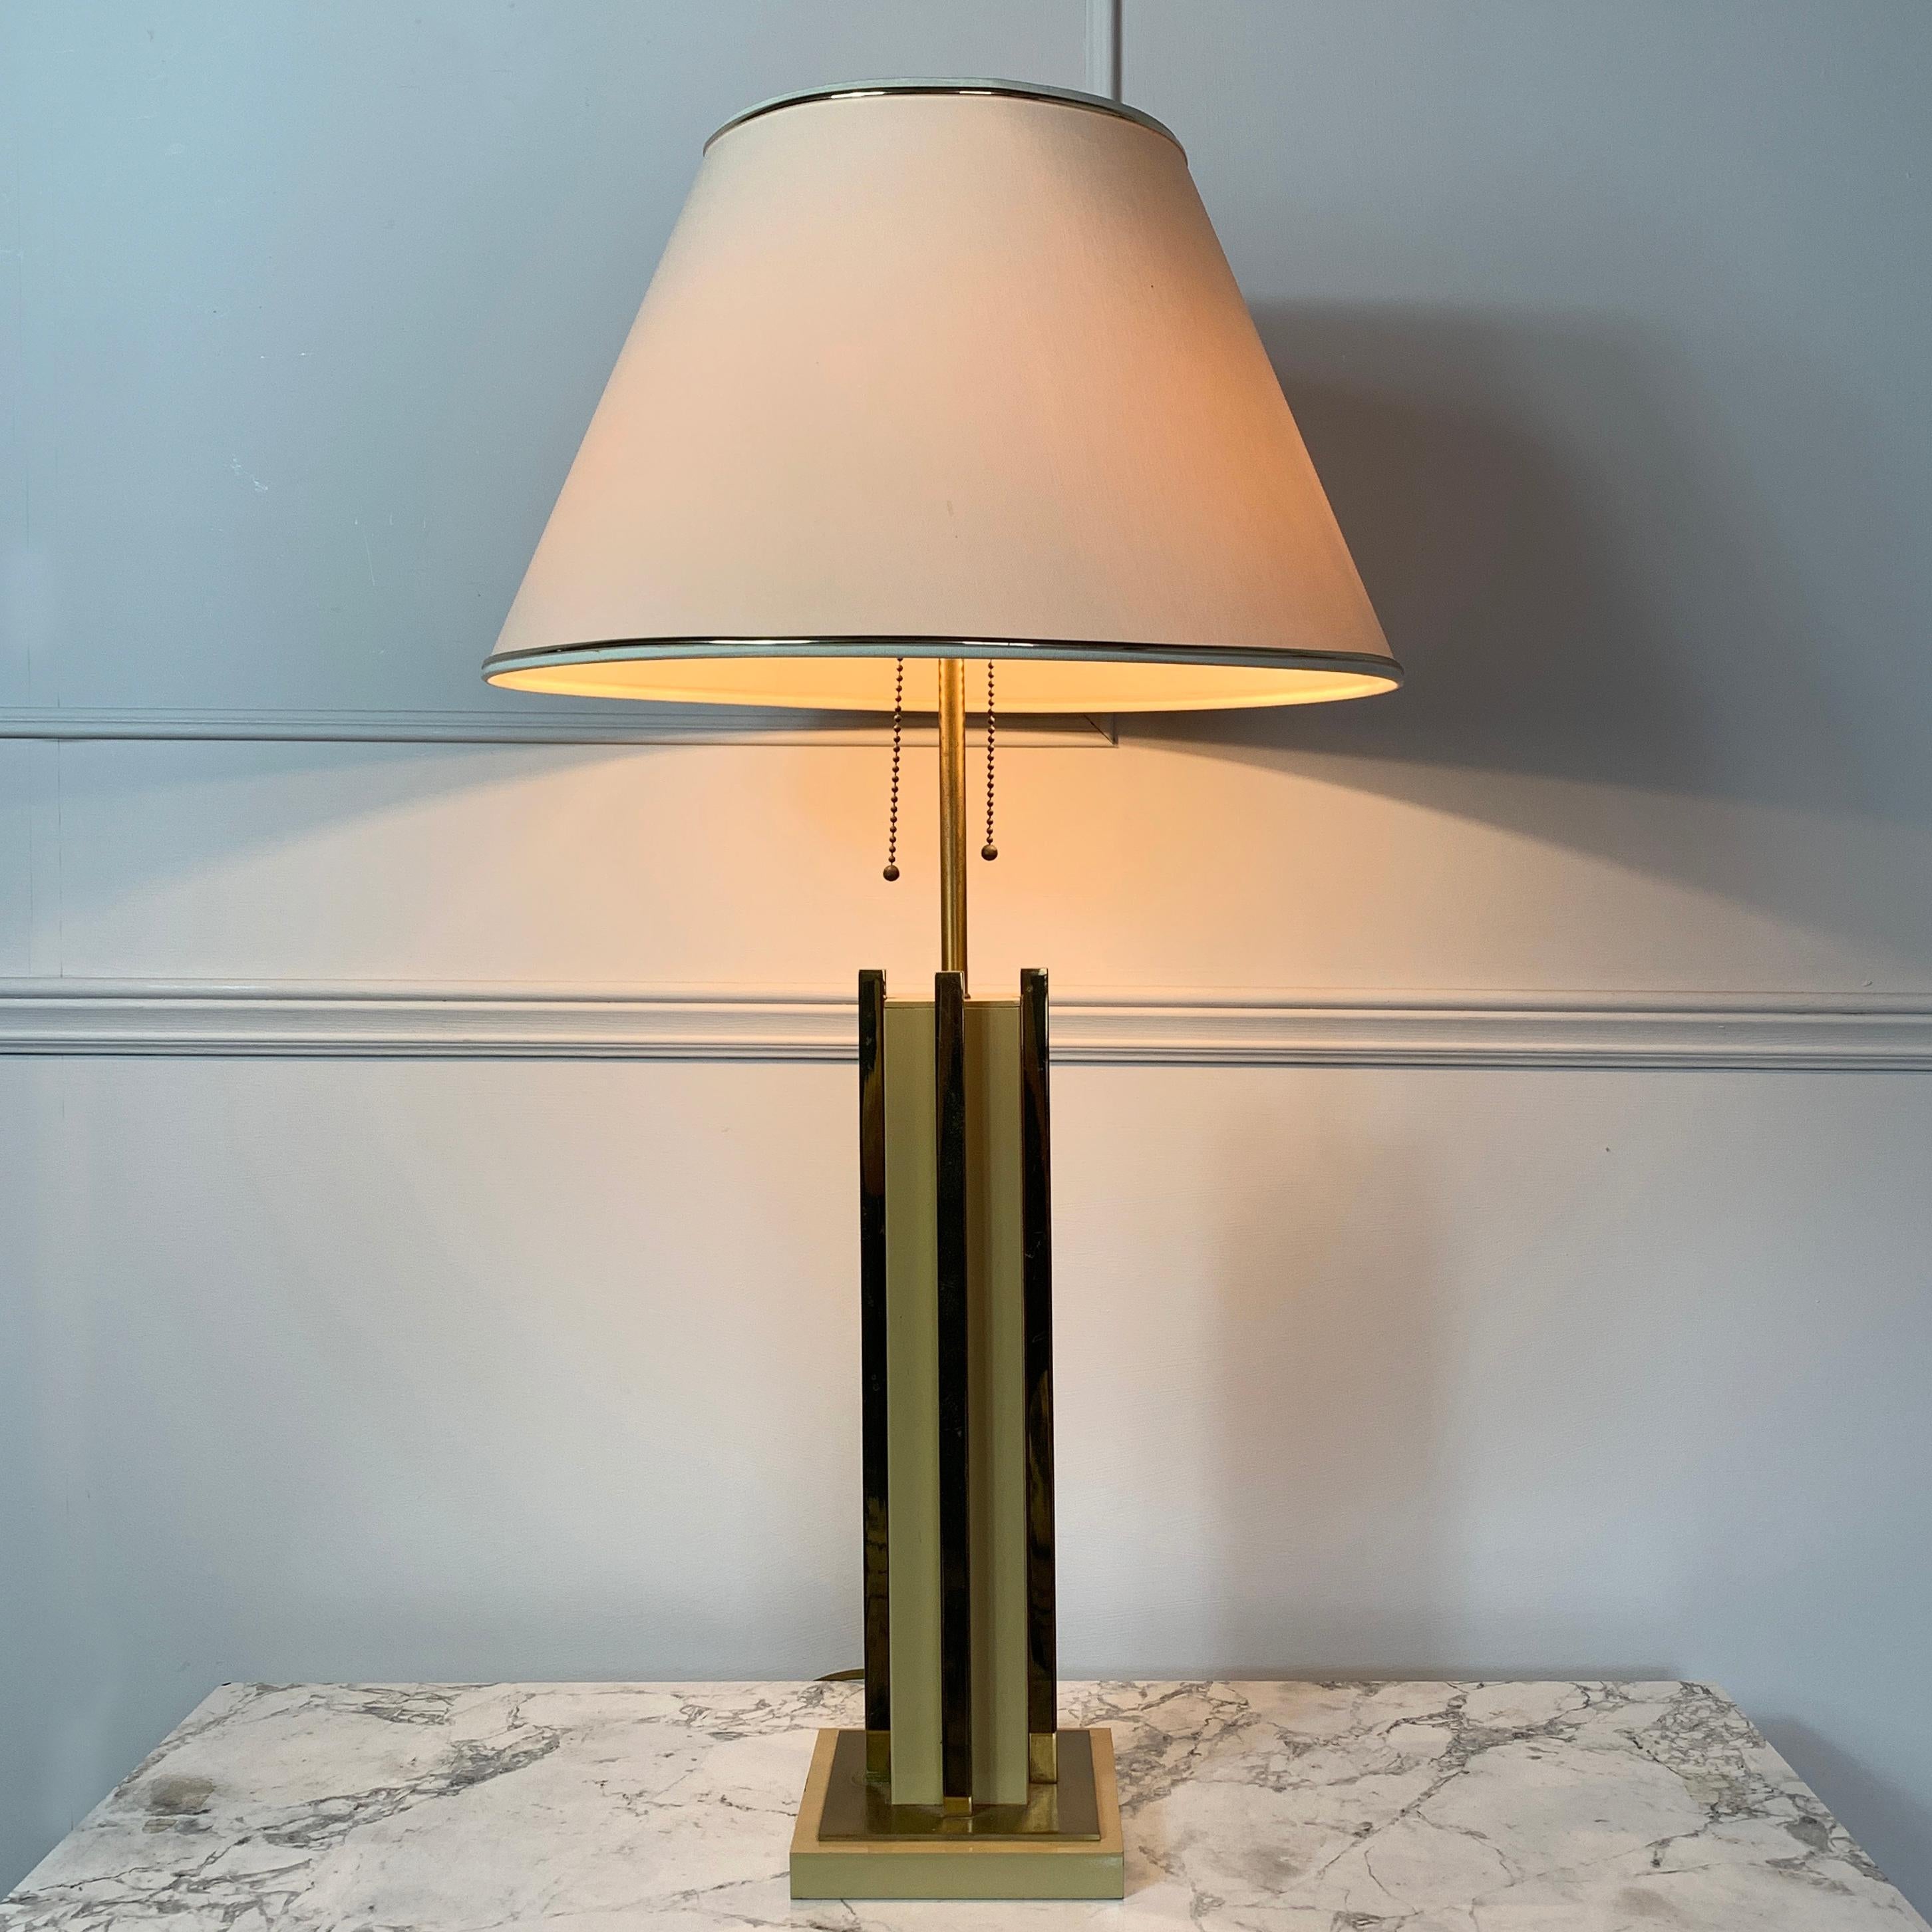 Willy Rizzo attributed table lamp, 1970s, Italy
The lamp has 2 E27 screw in bulb holders each with pull chain on/off independently
Soft caramel and brass
This is a heavy, quality lamp
75cm height, 14cm base width, shade 40cm width
Some areas of